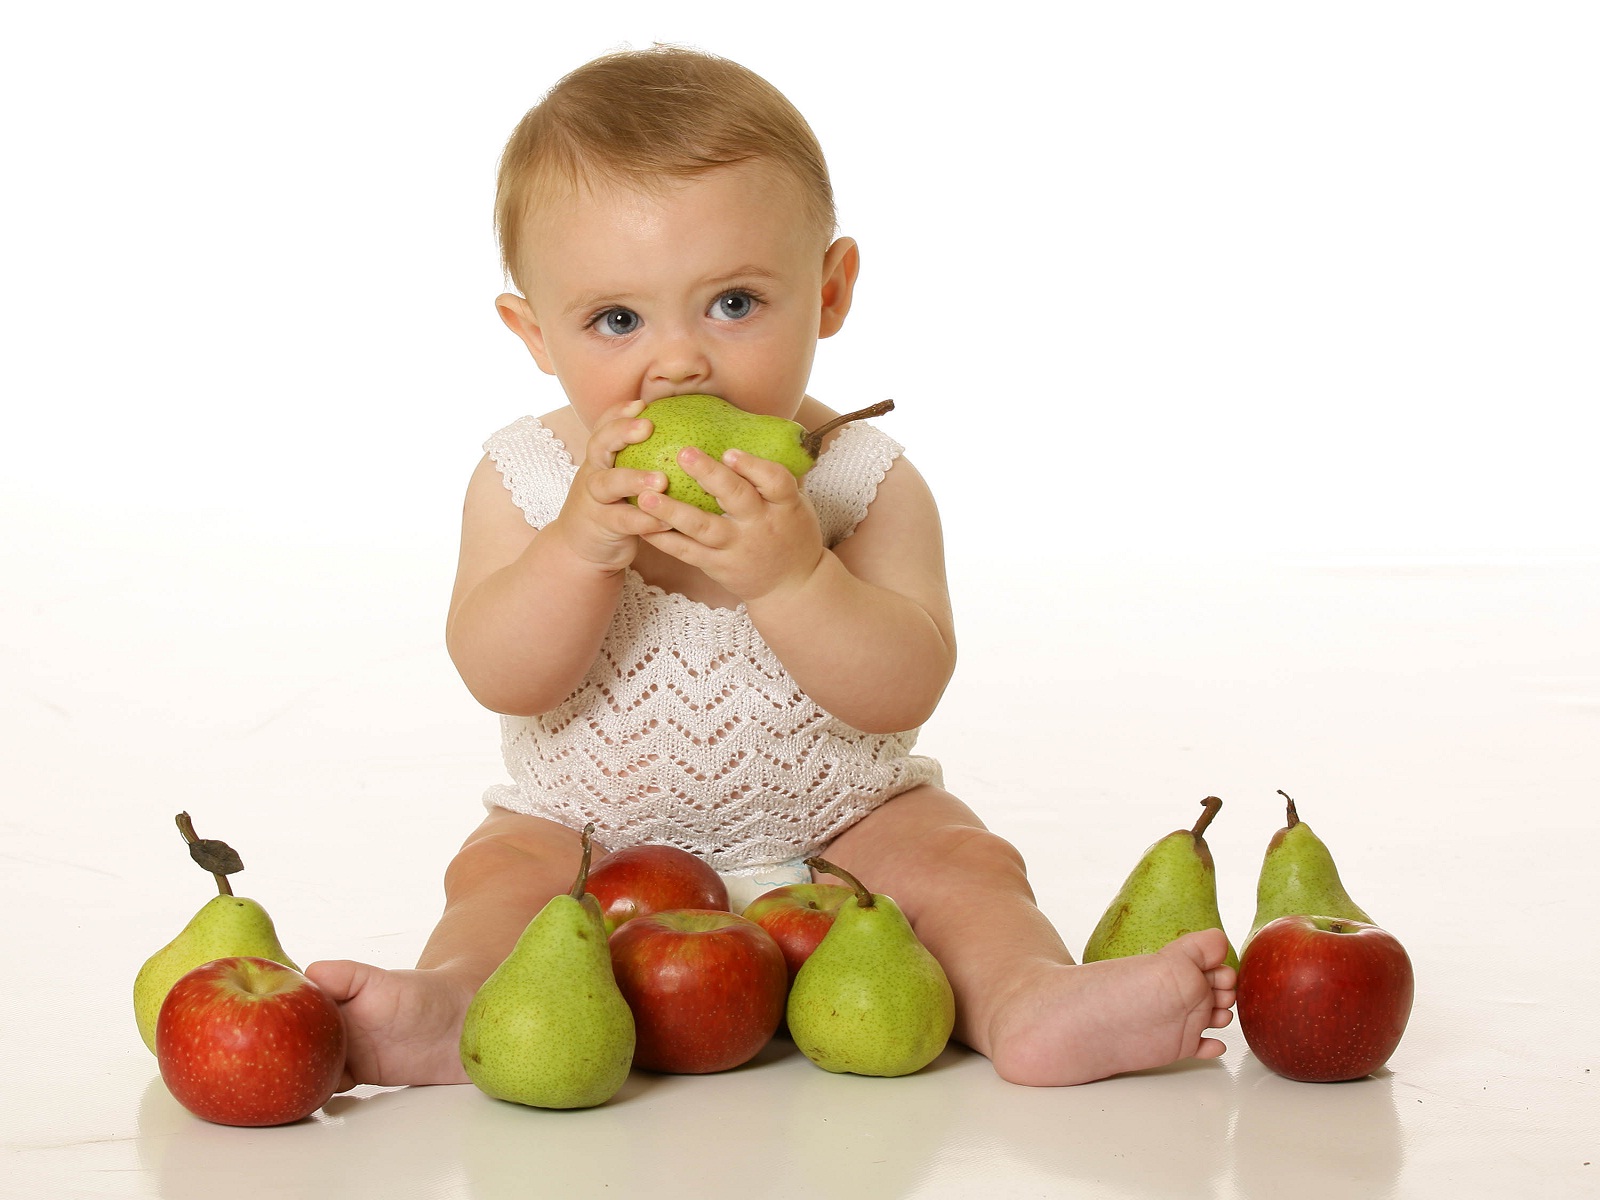 Cute baby eating fruits